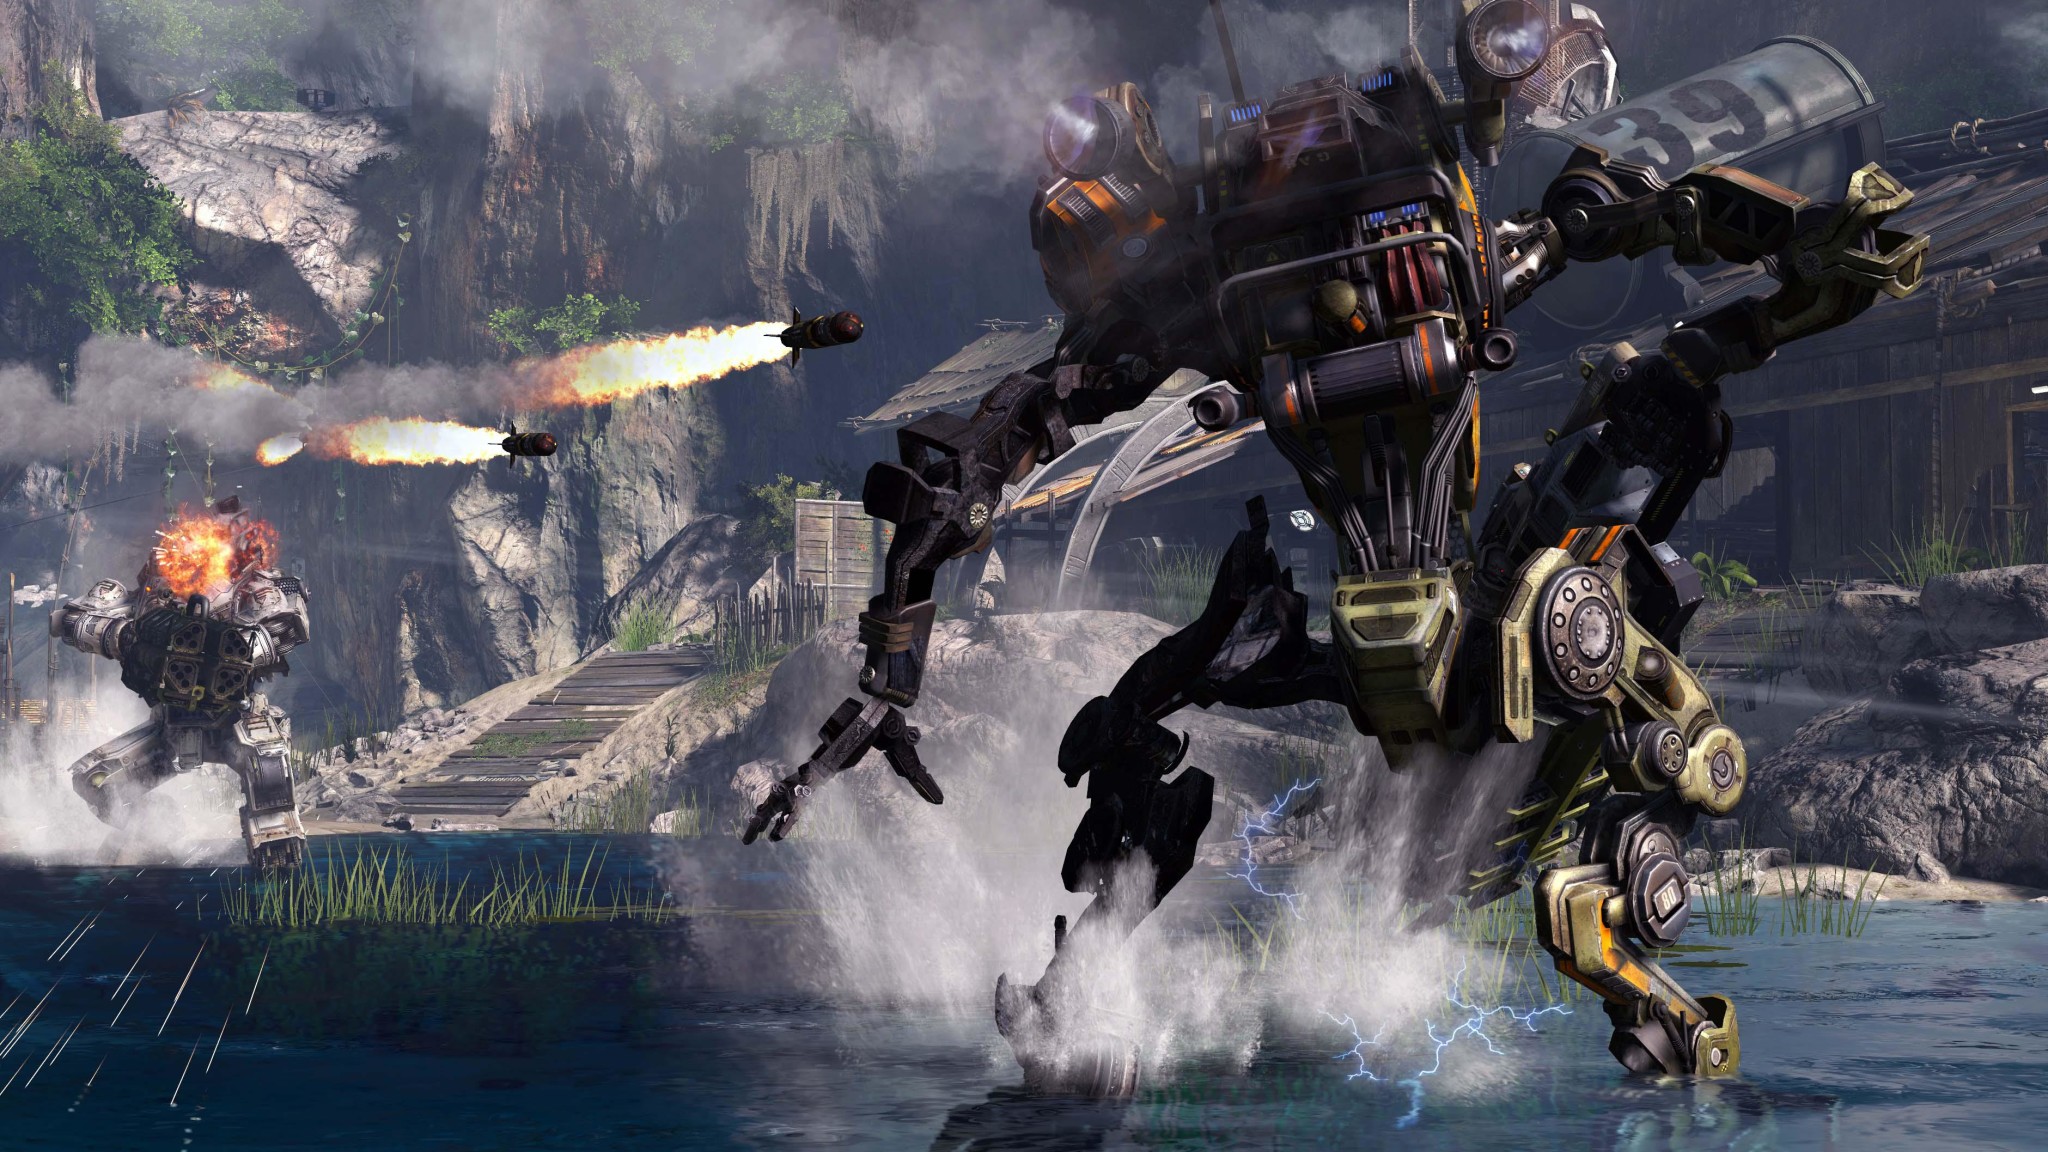 titanfall 2 wallpaper hd,action adventure game,strategy video game,games,pc game,cg artwork